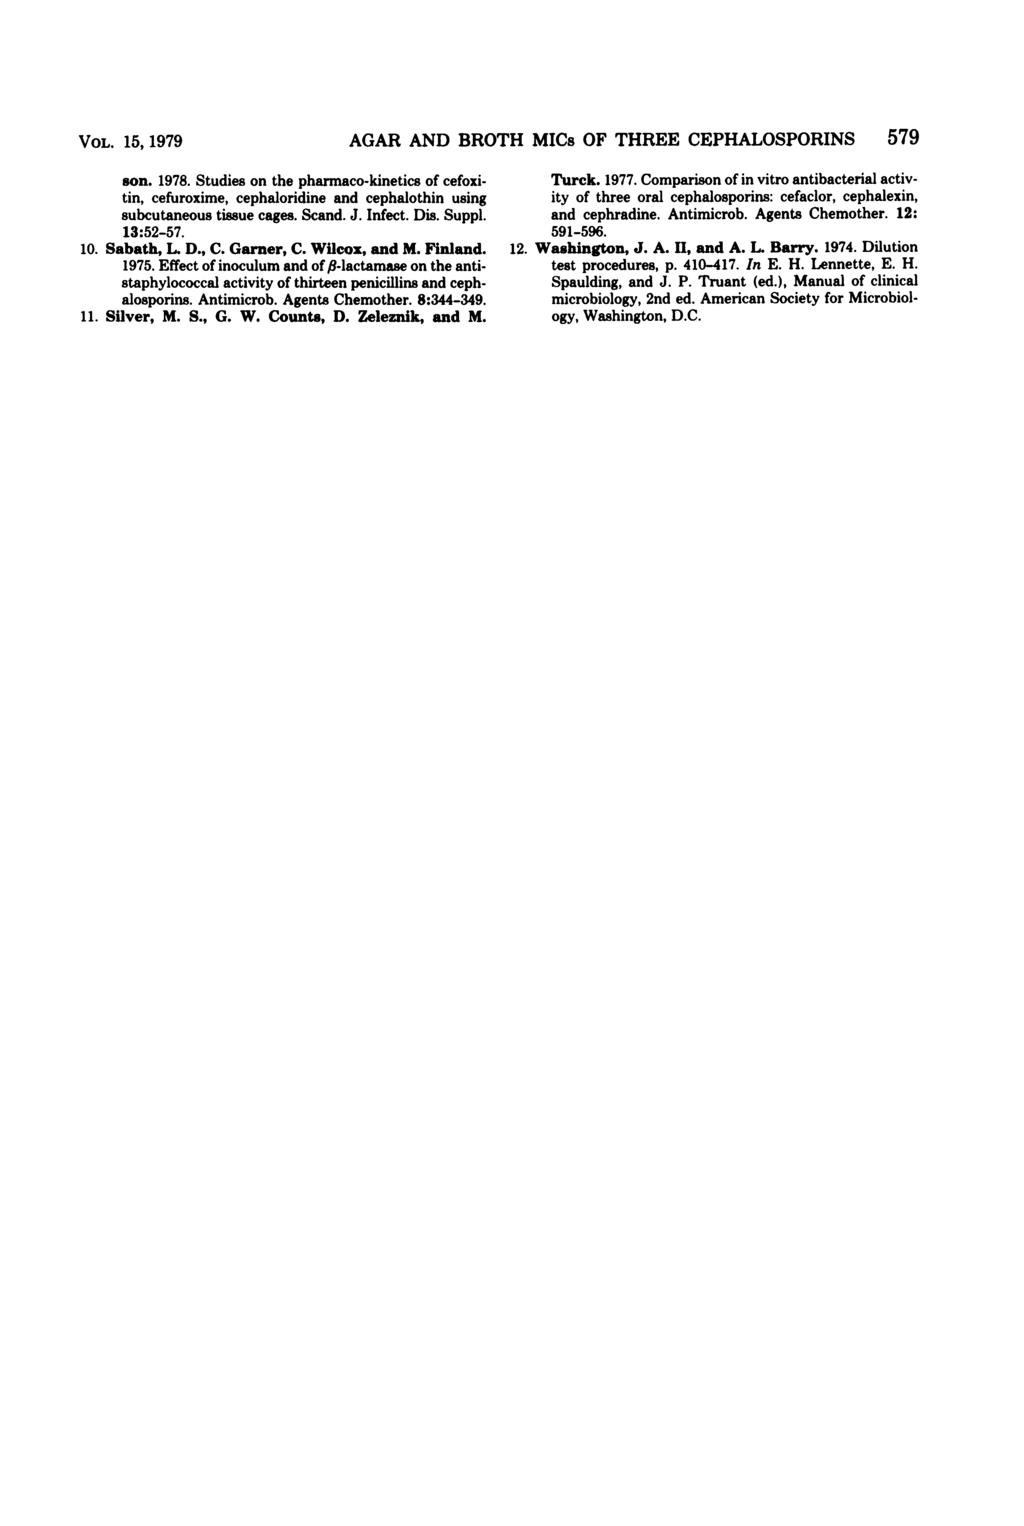 VOL 15, 1979 son 1978 Studies on the pharmaco-kinetics of cefoxitin, cefuroxime, cephaloridine and cephalothin using subcutaneous tissue cages Scand J nfect Dis Suppl 13:52-57 10 Sabath, L D, C